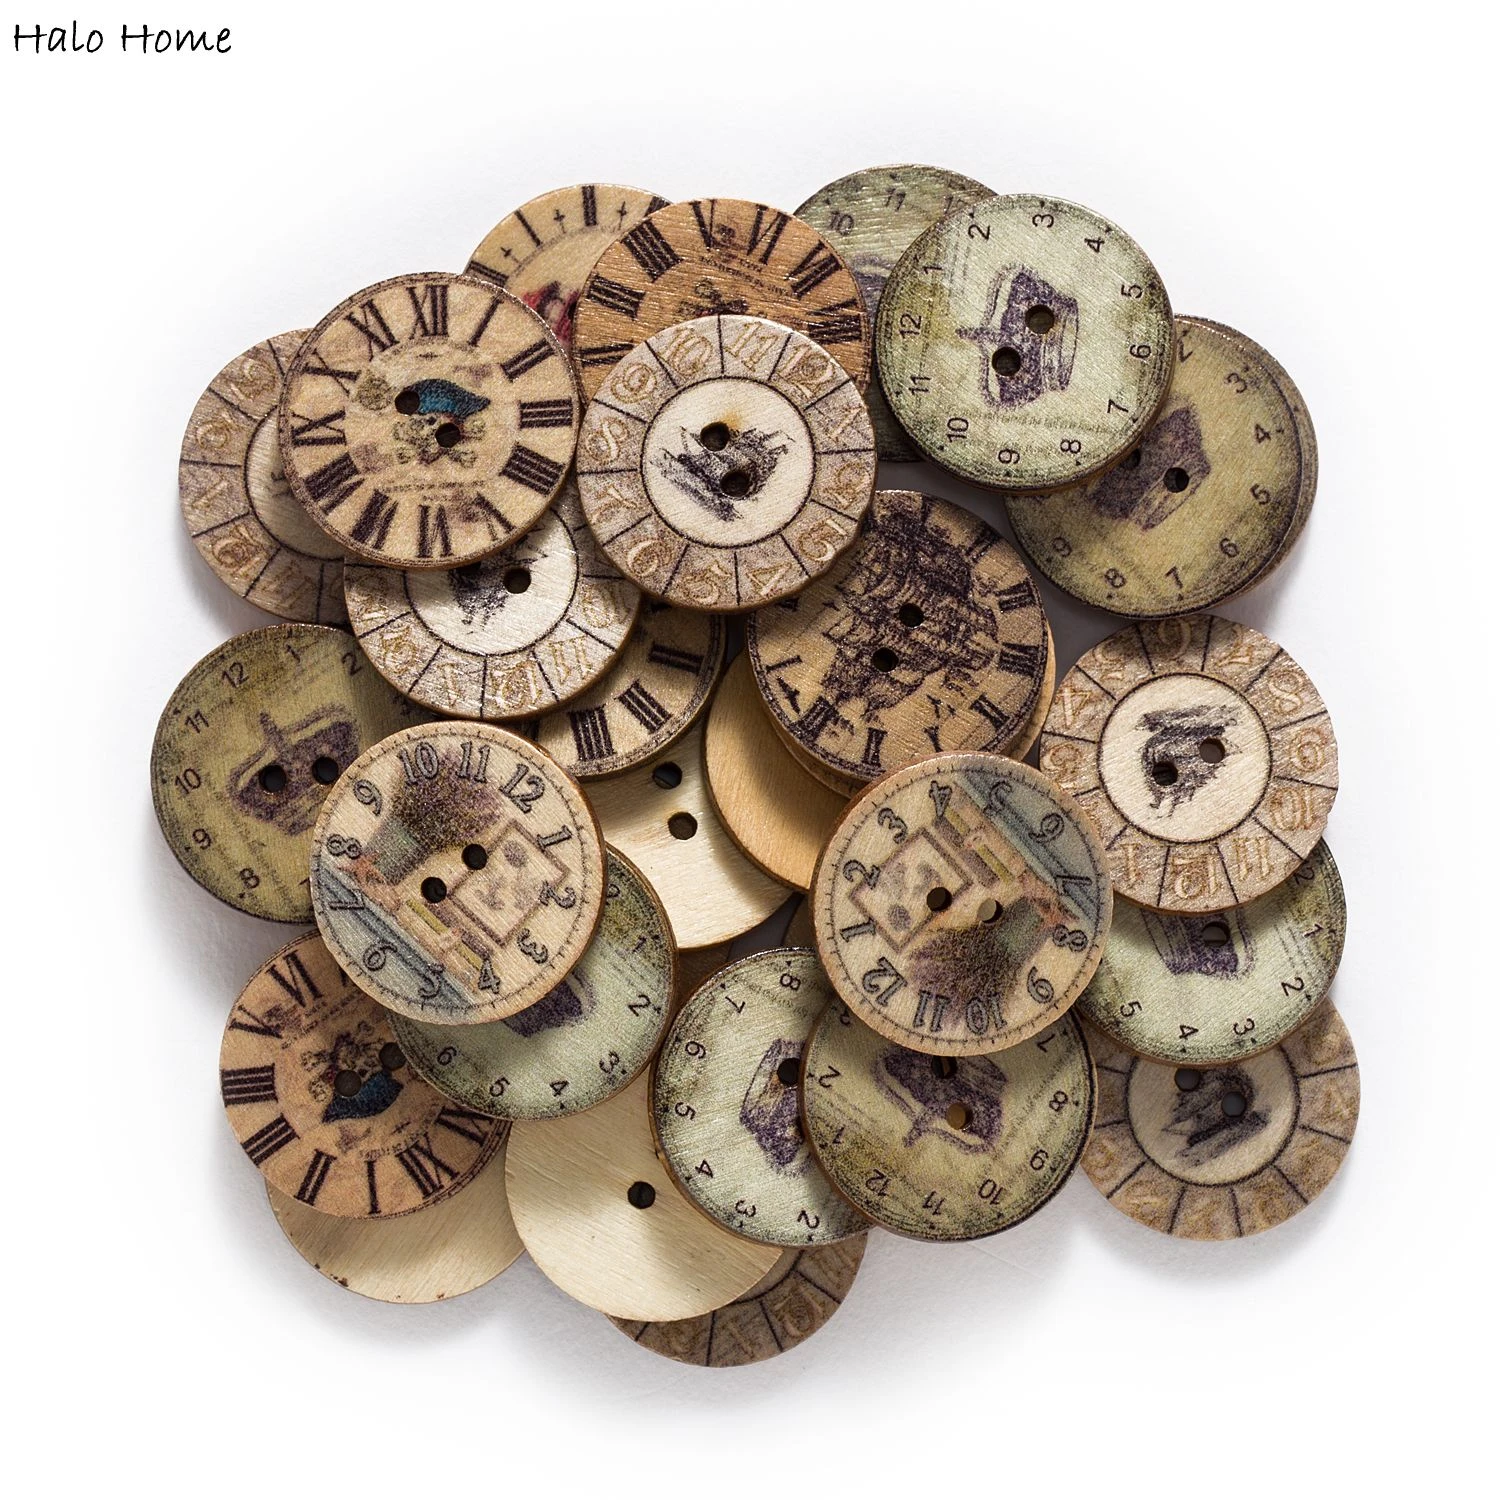 50pcs Clock theme Wood Buttons for Handwork Sewing Scrapbook Clothing Crafts Accessories Gift Card Handmade Decoration 20/25mm